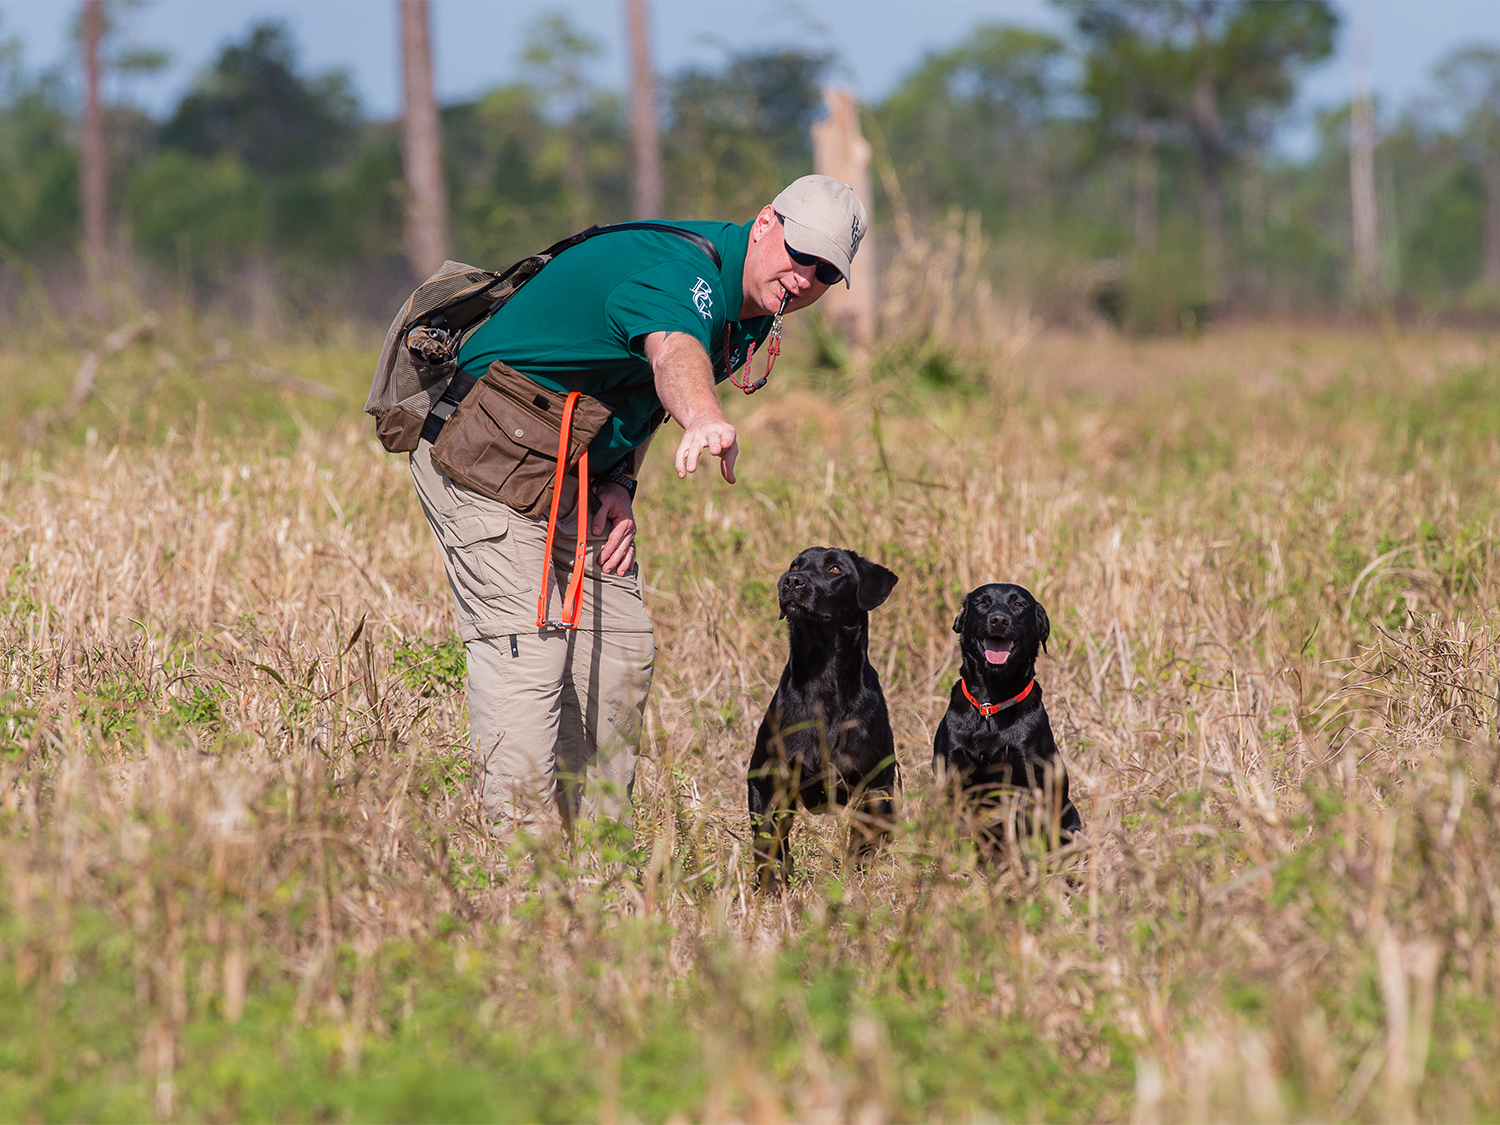 A hunter trains two hunting dogs in an open field.